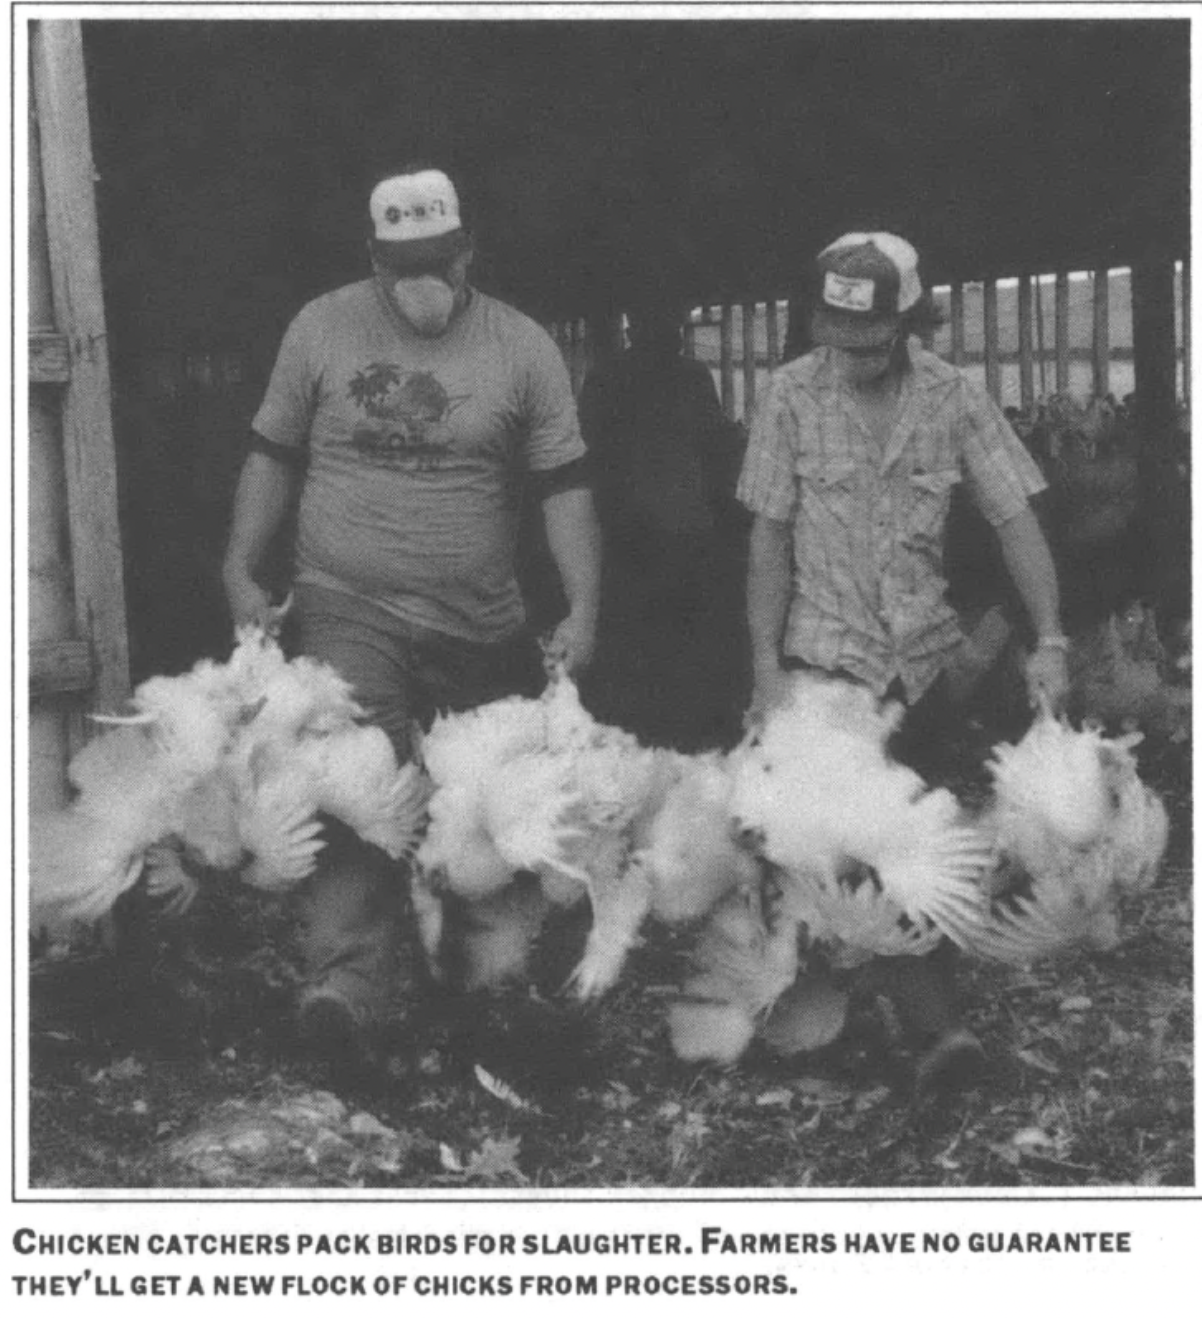 two chicken catchers pack birds for slaughter